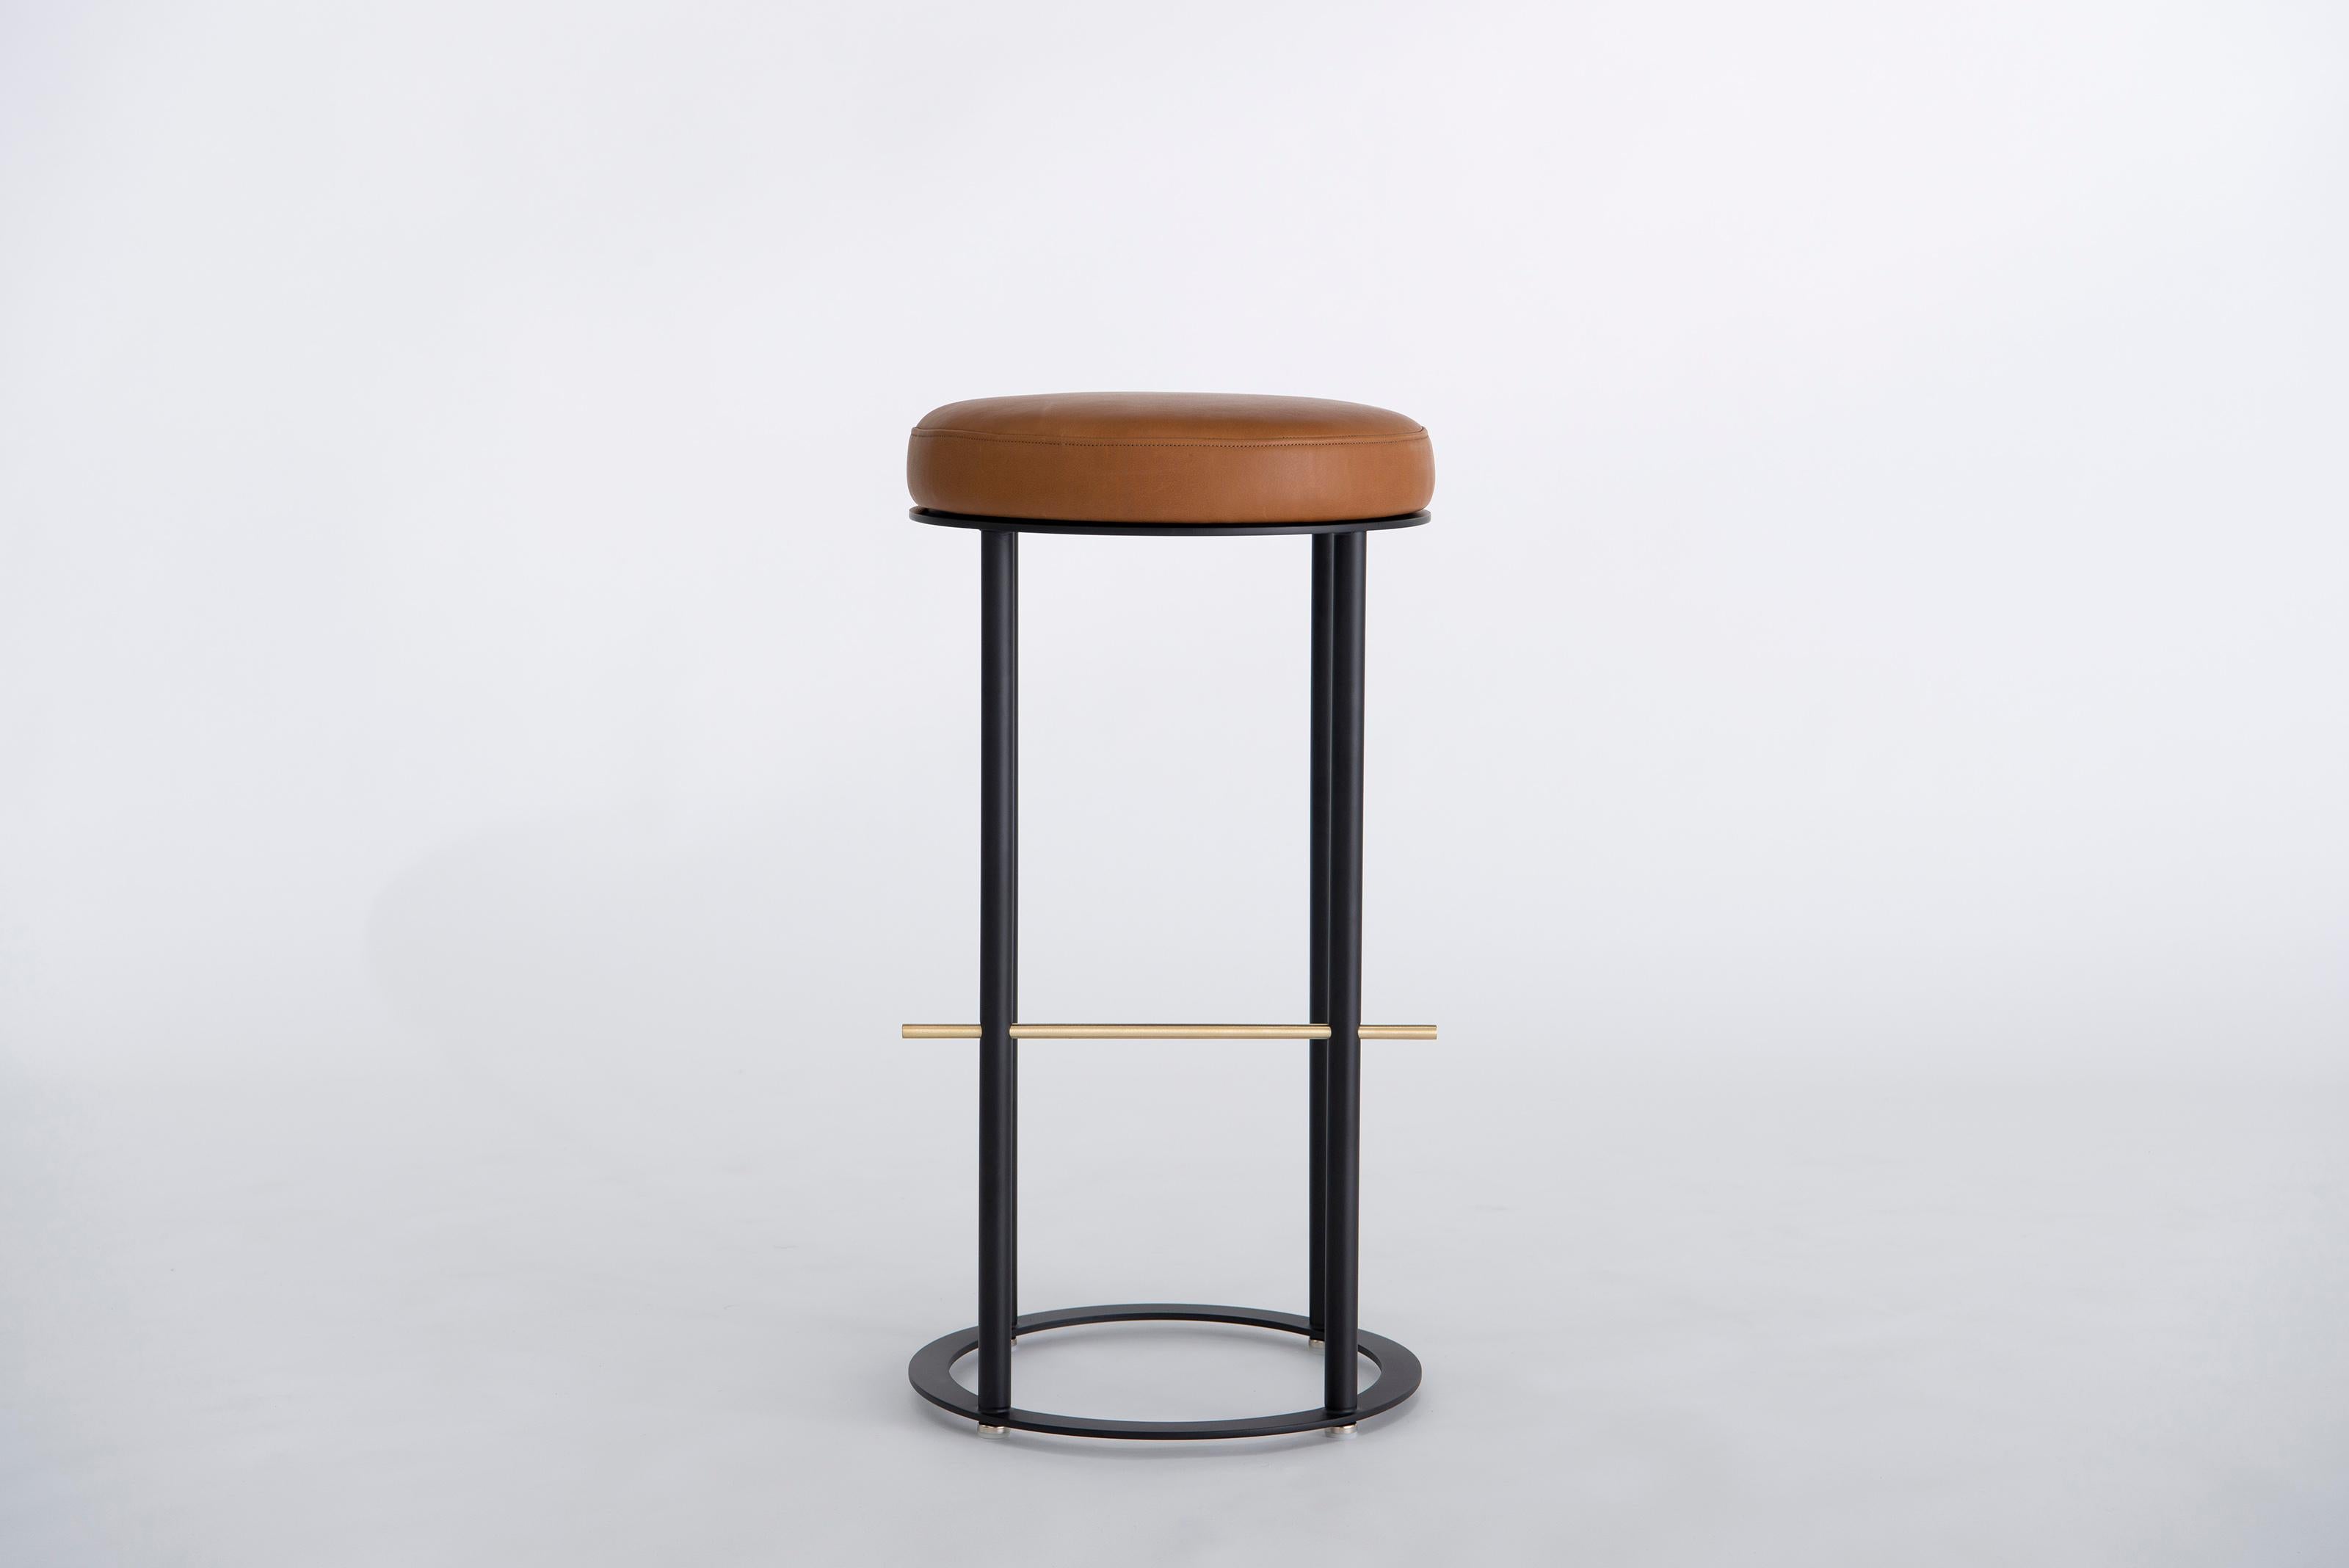 Icon Bar Stool by Phase Design
Dimensions: Ø 40.6  H 73,7 cm. SH: 73,7 cm.
Materials: Leather, powder-coated metal and brushed brass.

Solid steel and brass with upholstered top. Steel bar available in a flat black or white powder coat finish with